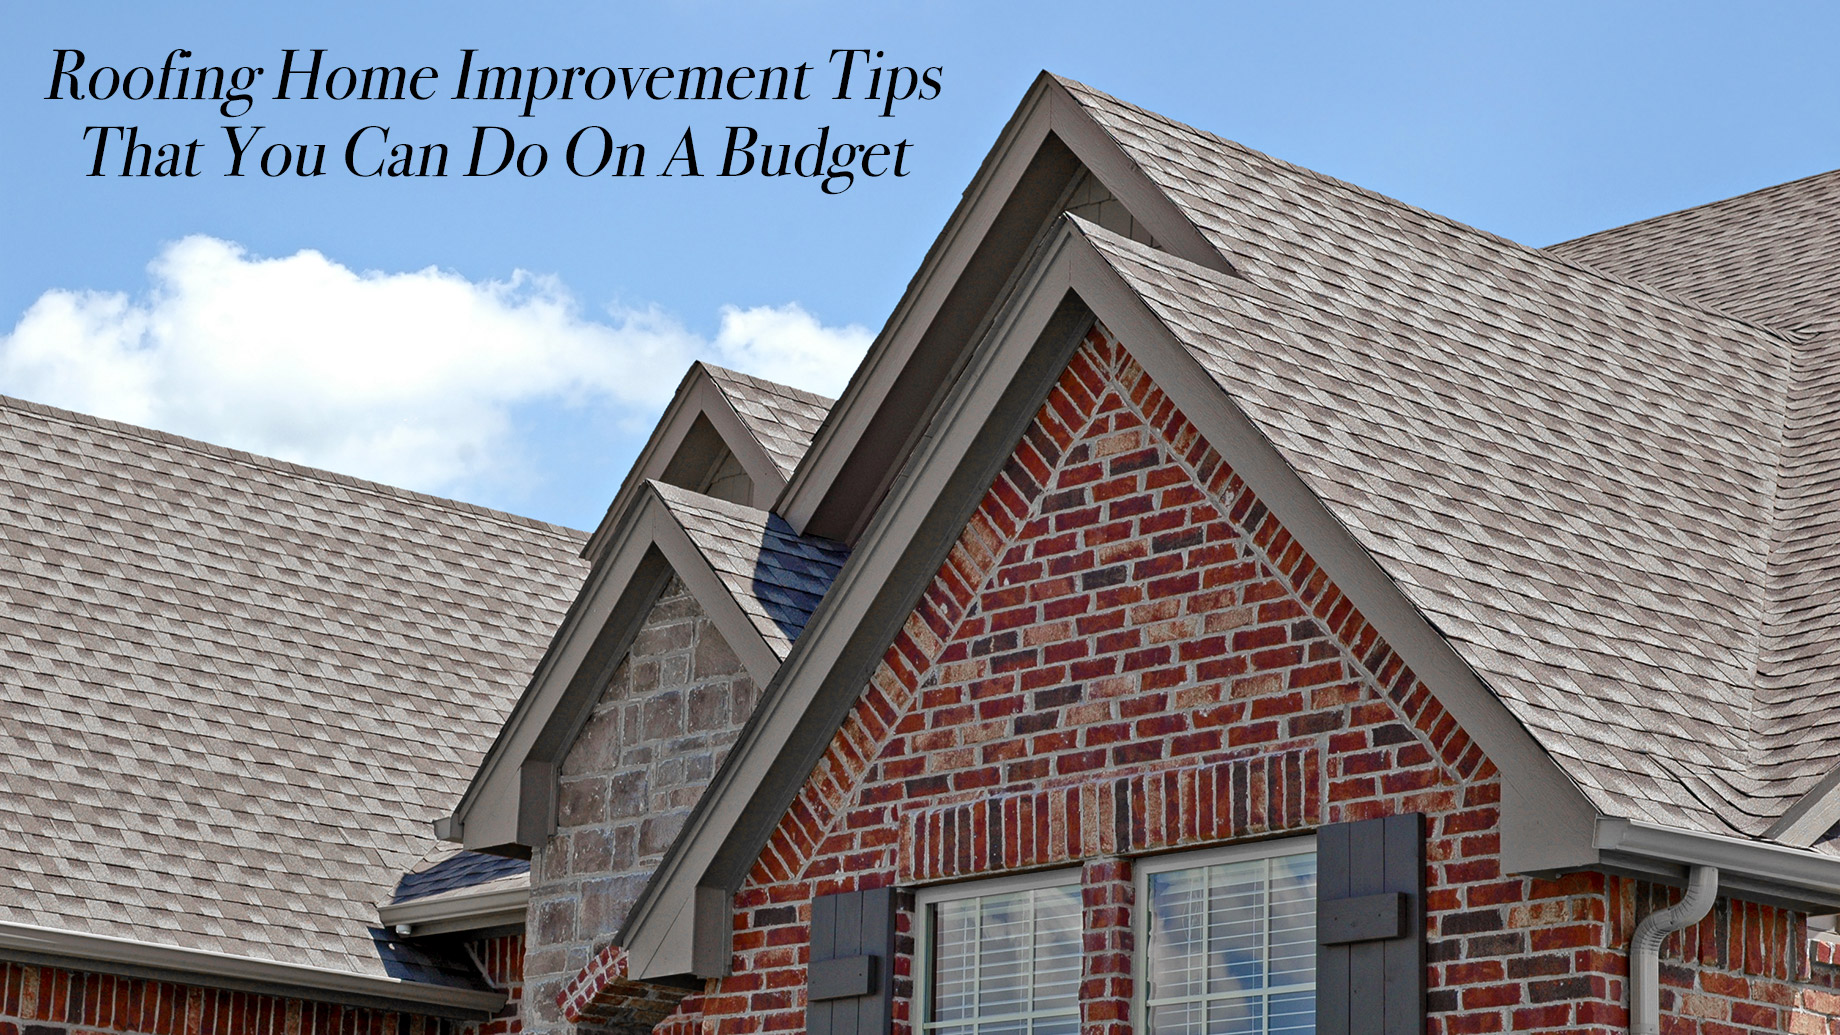 Roofing Home Improvement Tips That You Can Do On A Budget